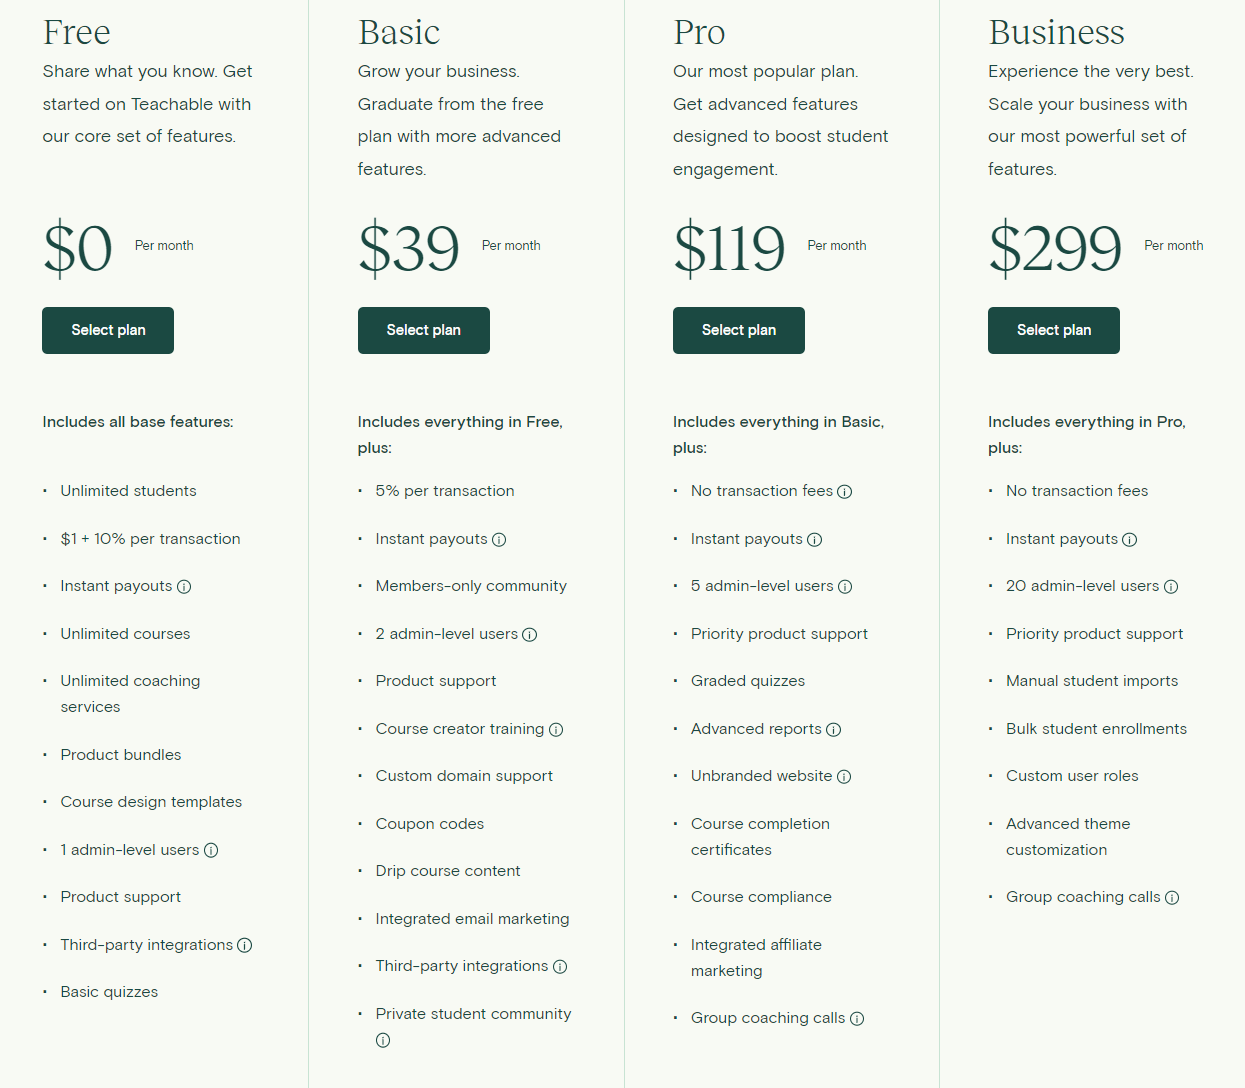 A screenshot of Teachable's pricing plans showing the free, basic, pro, Business.